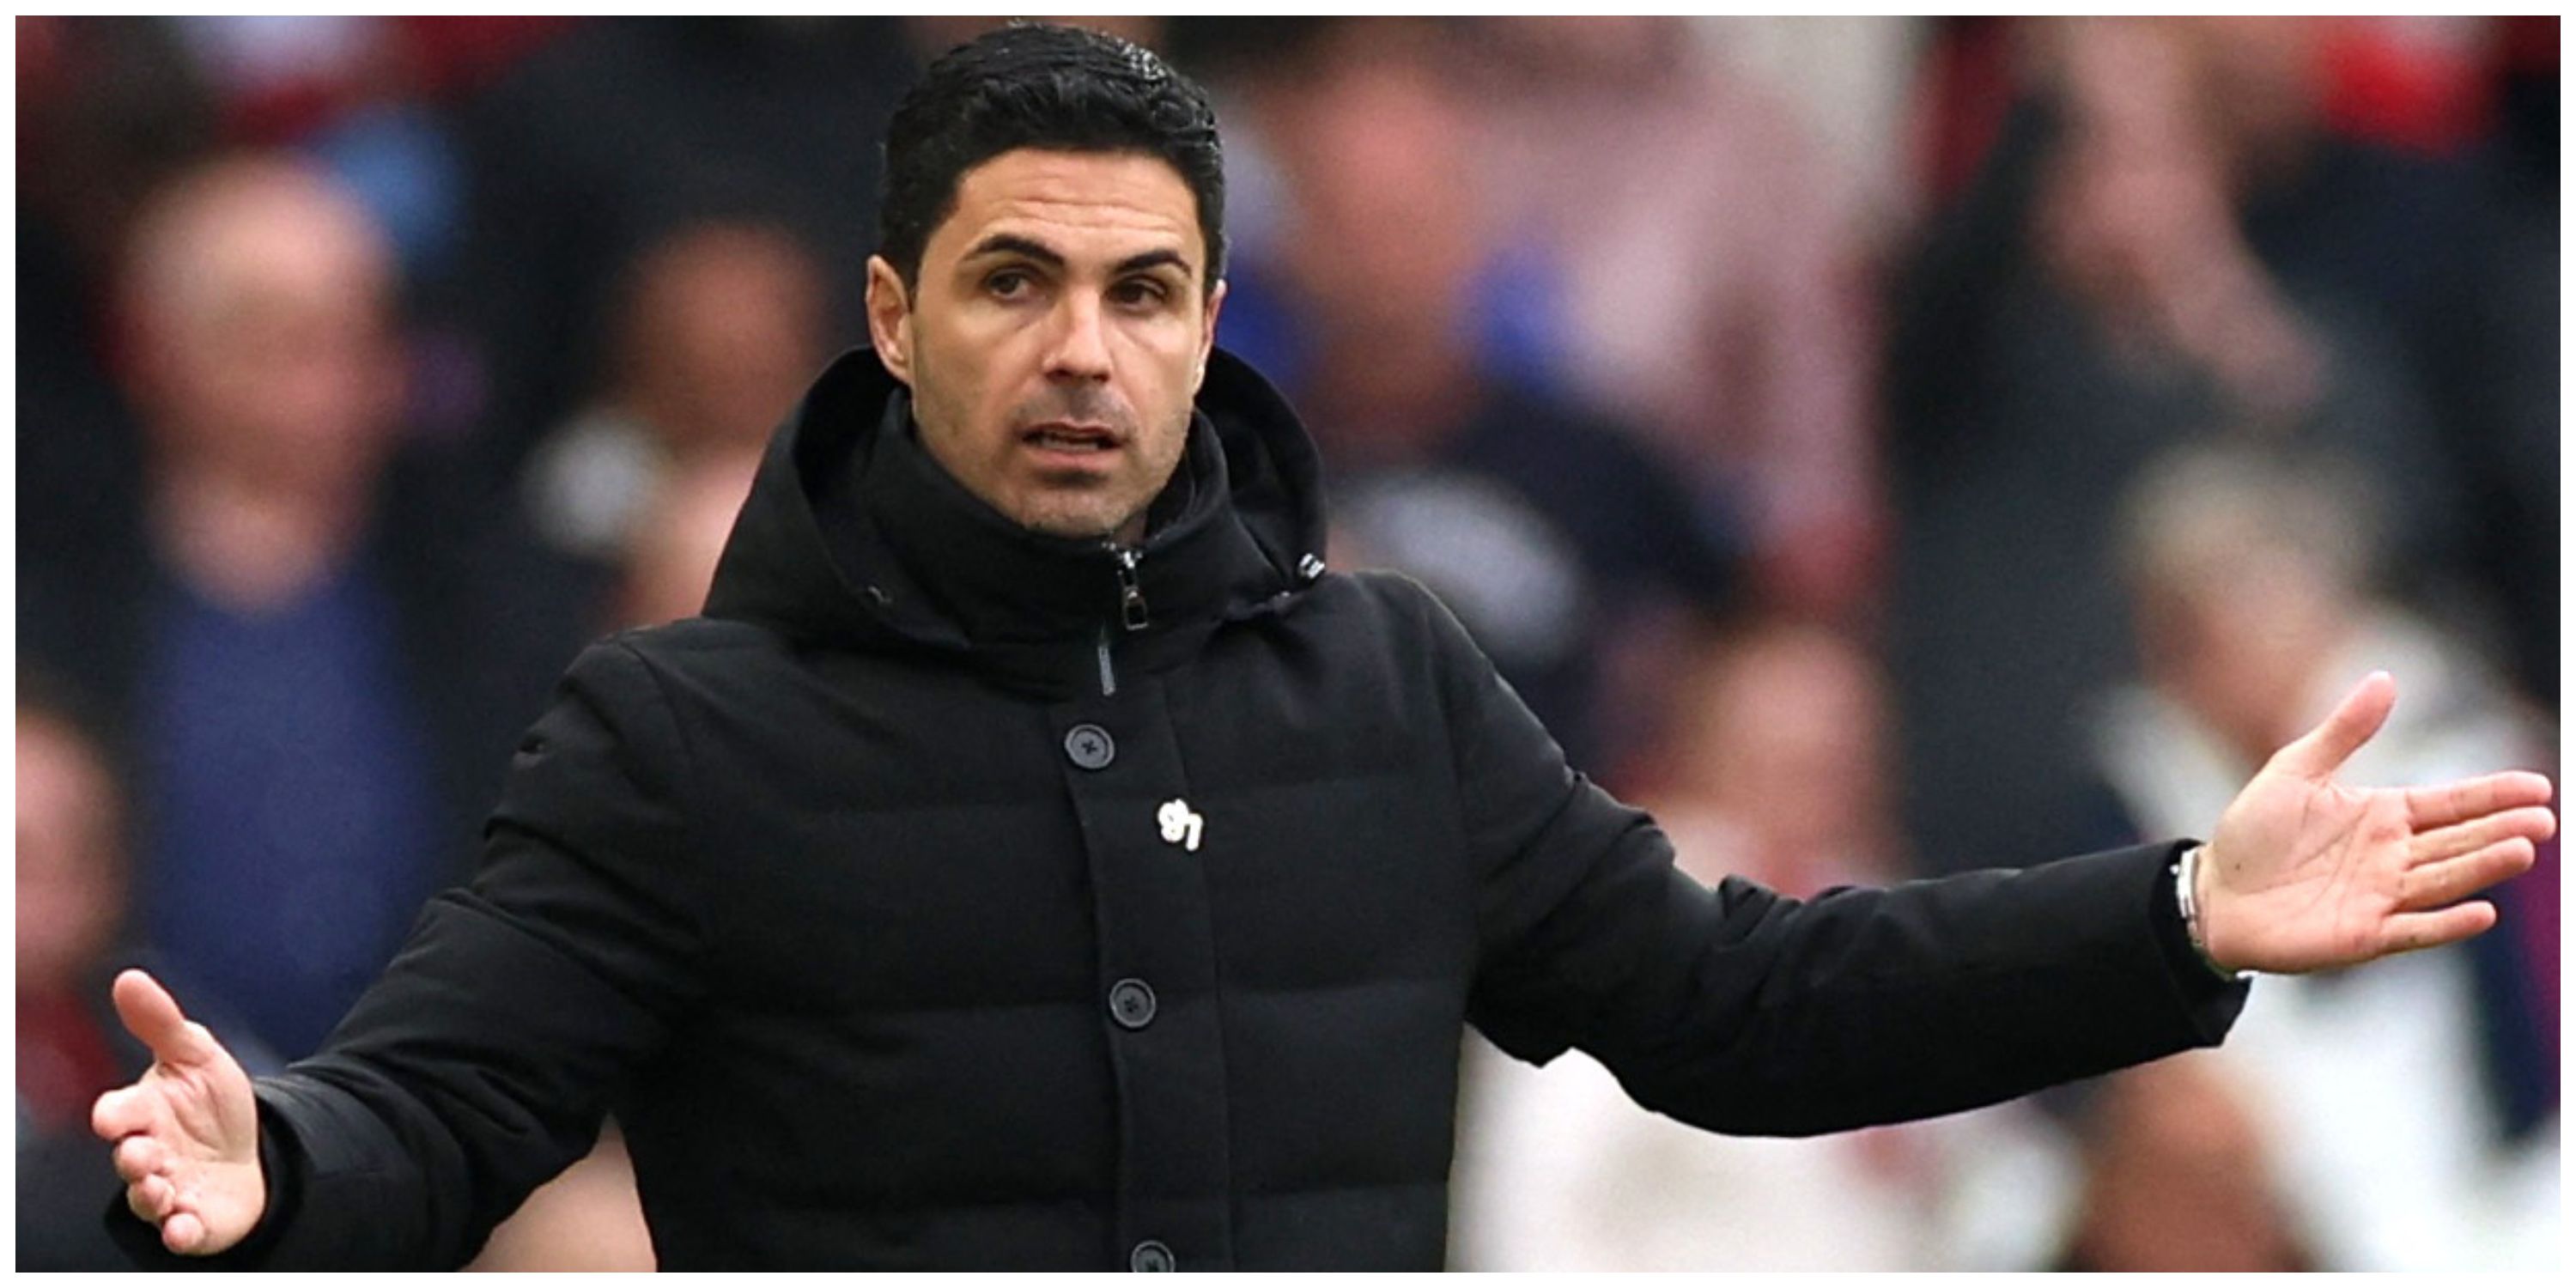 Arsenal manager Mikel Arteta with arms up